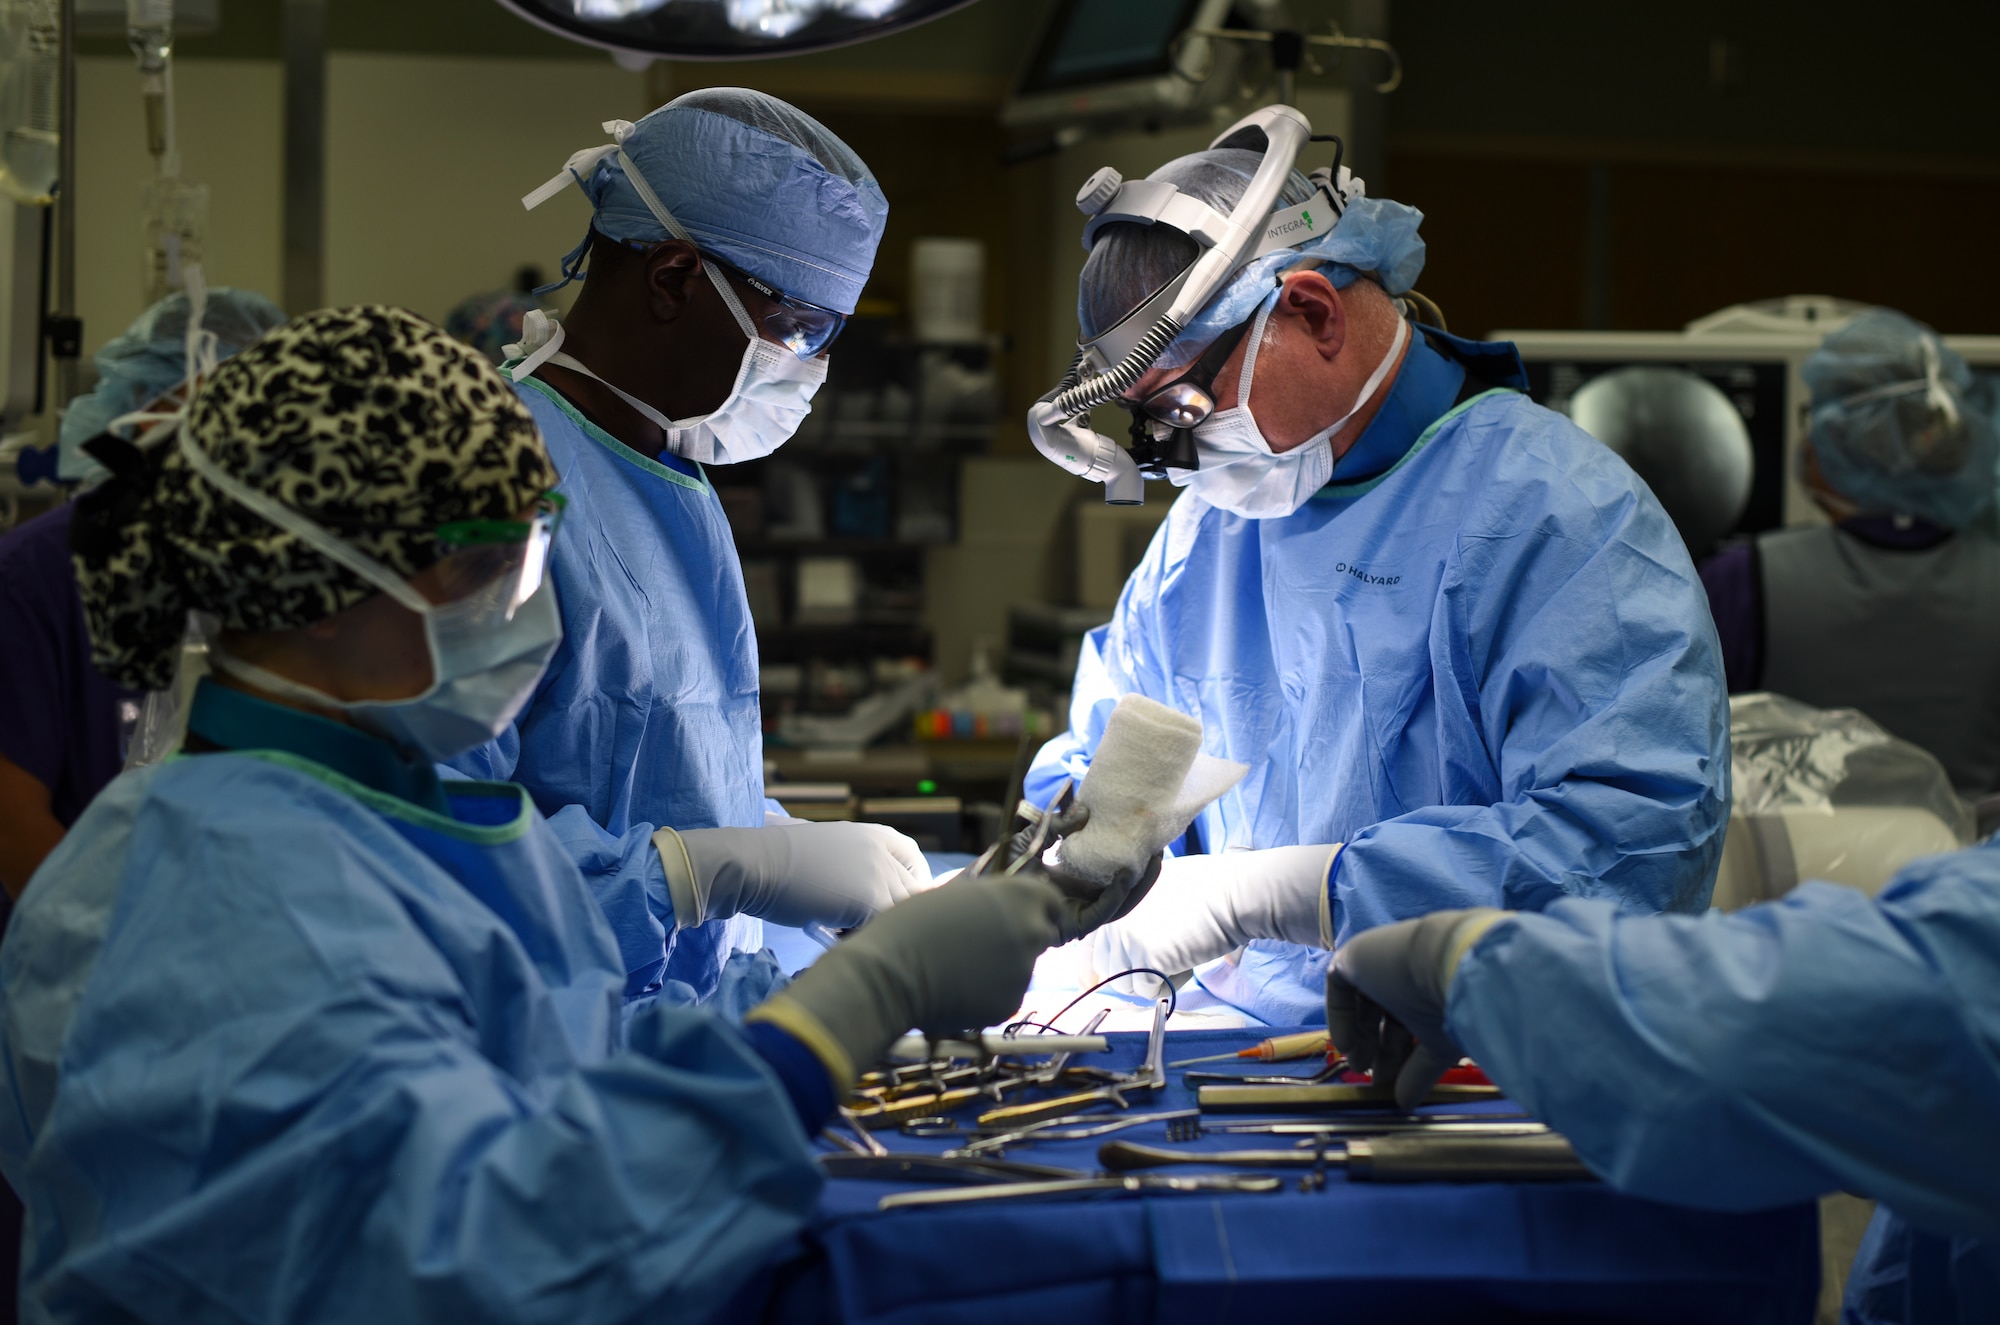 Col. (Dr.) Edward Anderson, 99th Medical Group orthopedic spine surgeon, performs a lumbar microdiscectomy surgery at Nellis Air Force Base, Nevada, Aug. 27, 2018. A lumbar microdiscectomy surgery is performed to remove a portion of a herniated disc in the lower back. (U.S. Air Force photo by Airman 1st Class Andrew D. Sarver)